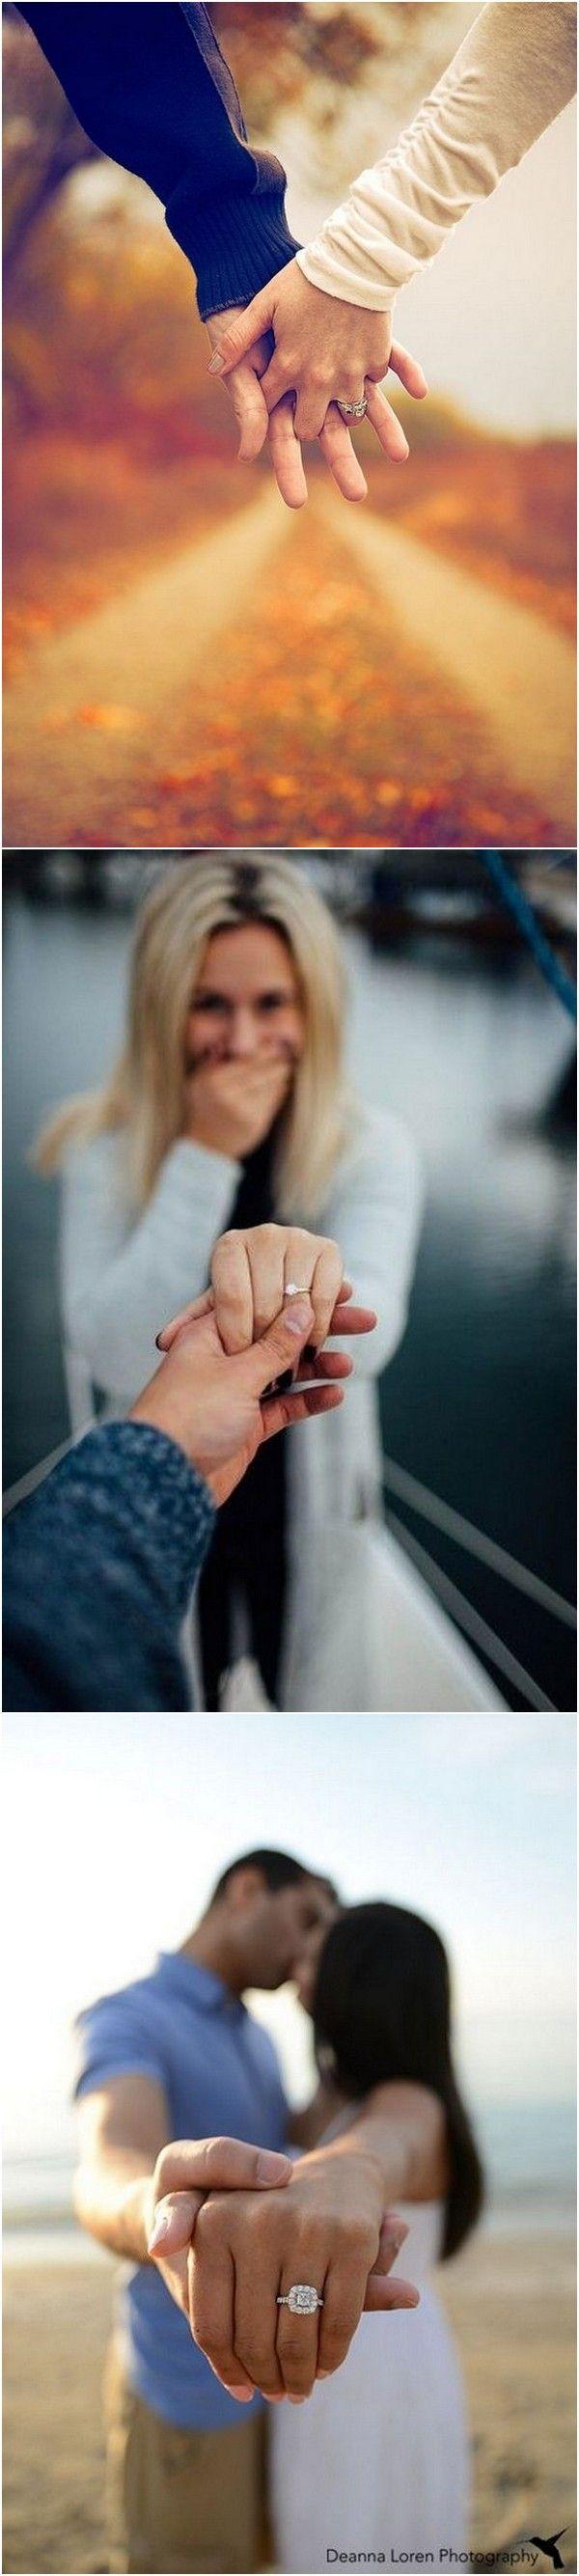 Mariage - Top 20 Engagement Photo Ideas To Love - Page 2 Of 2